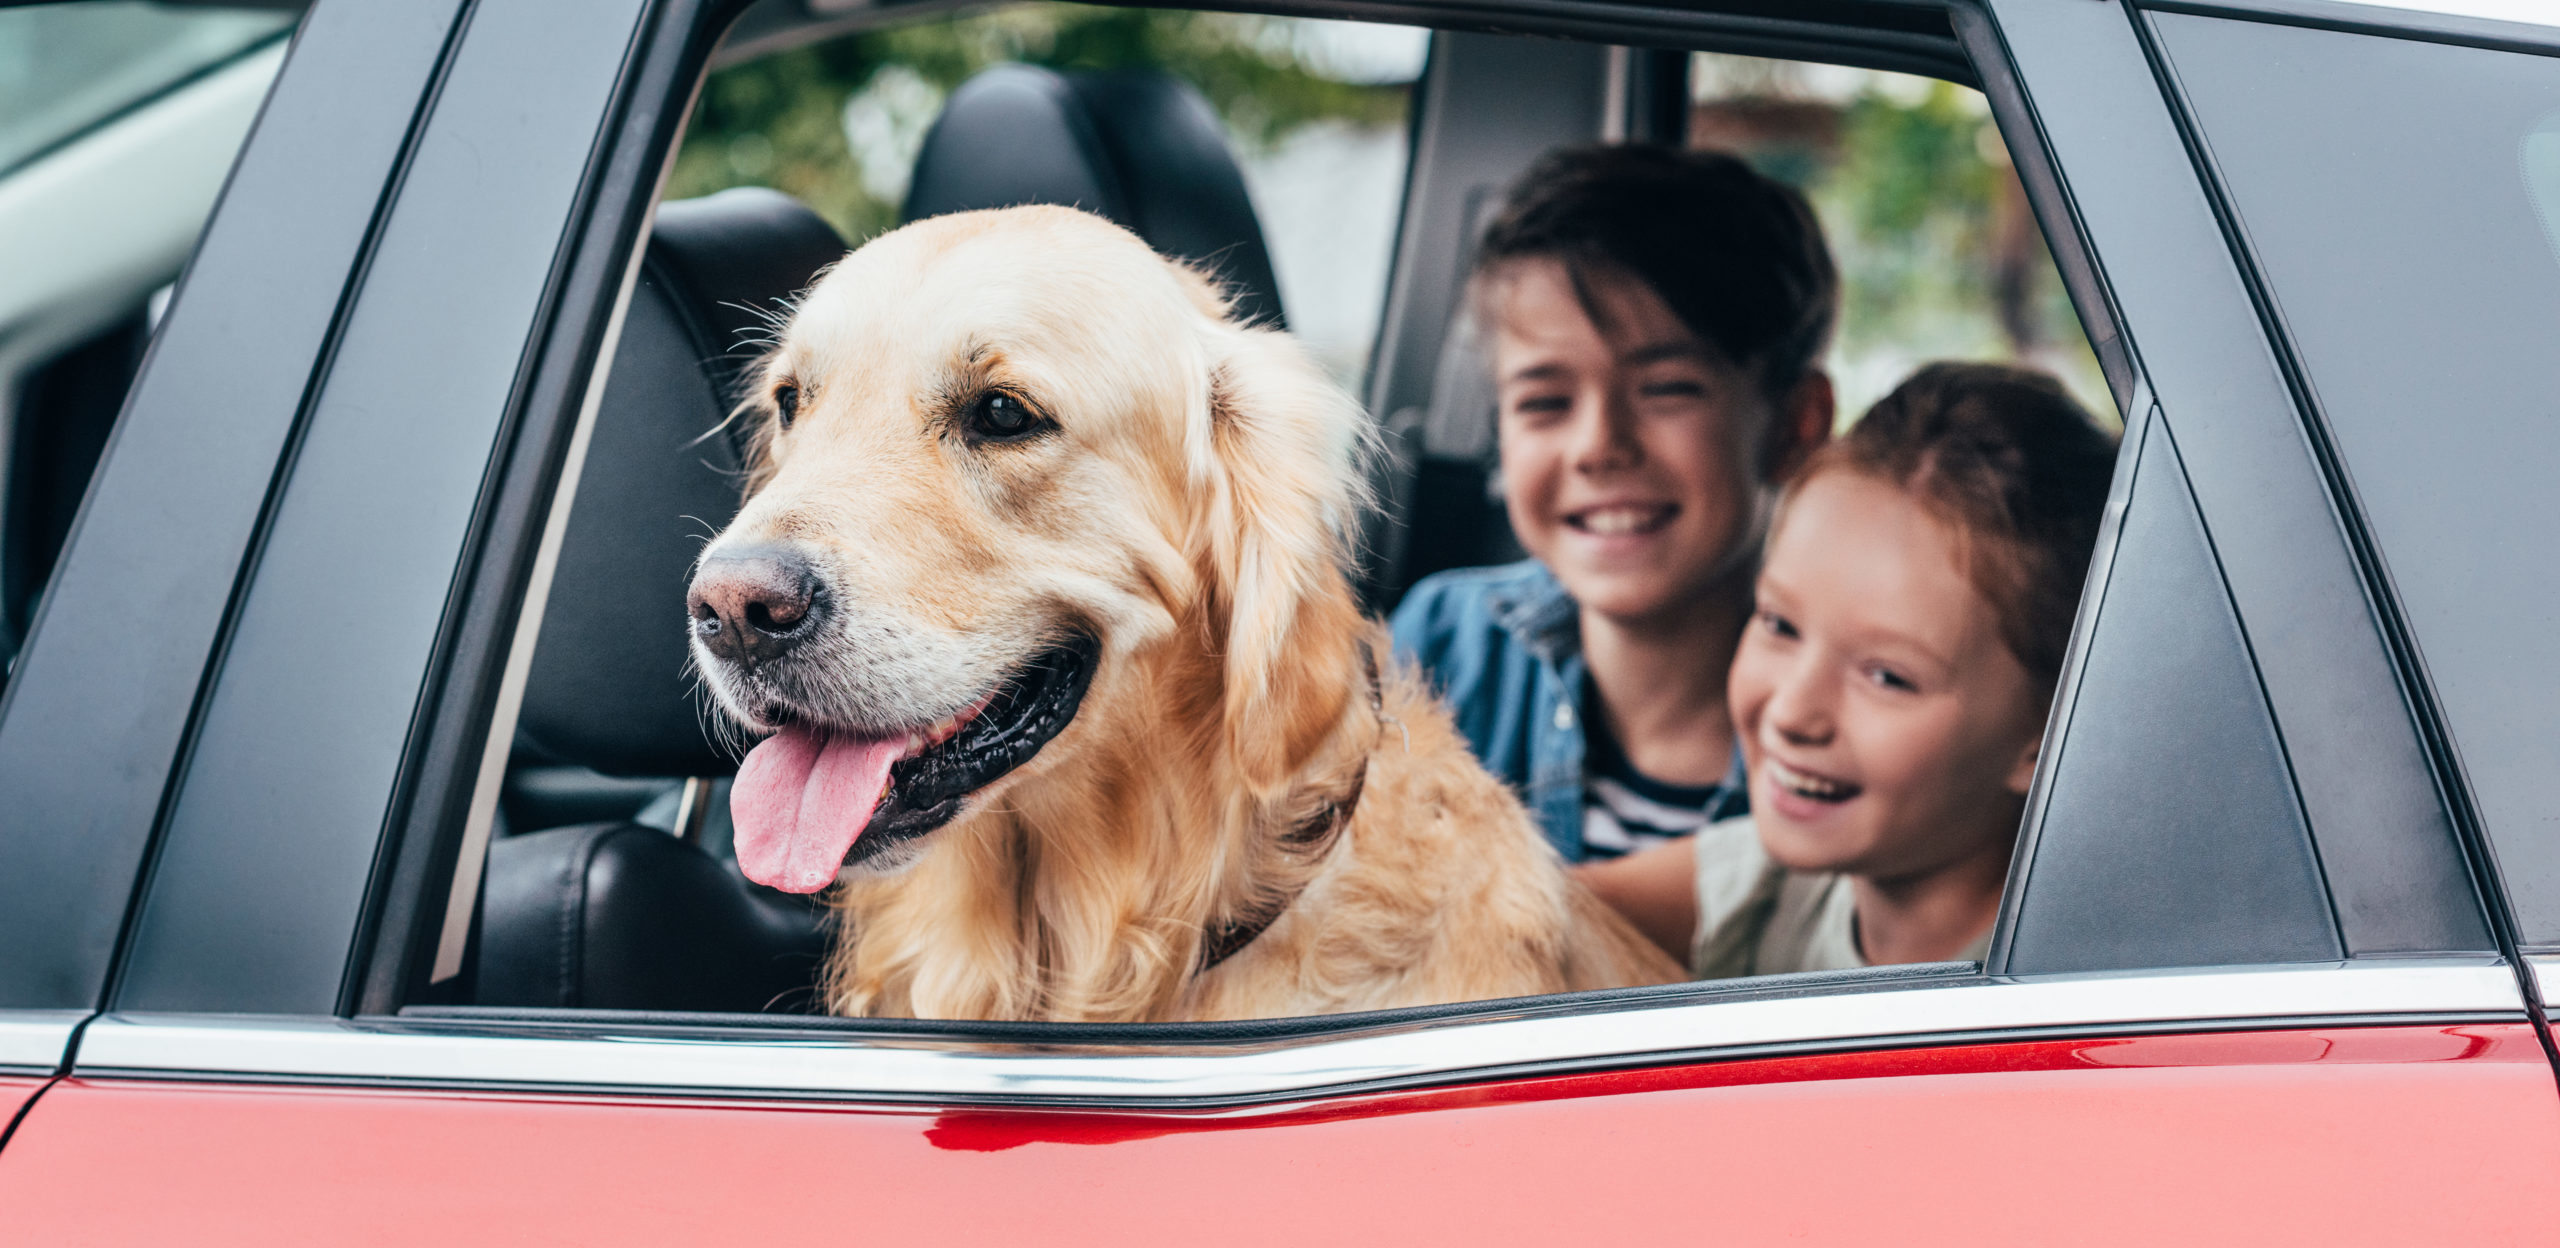 Kids and dog in back seat of red car